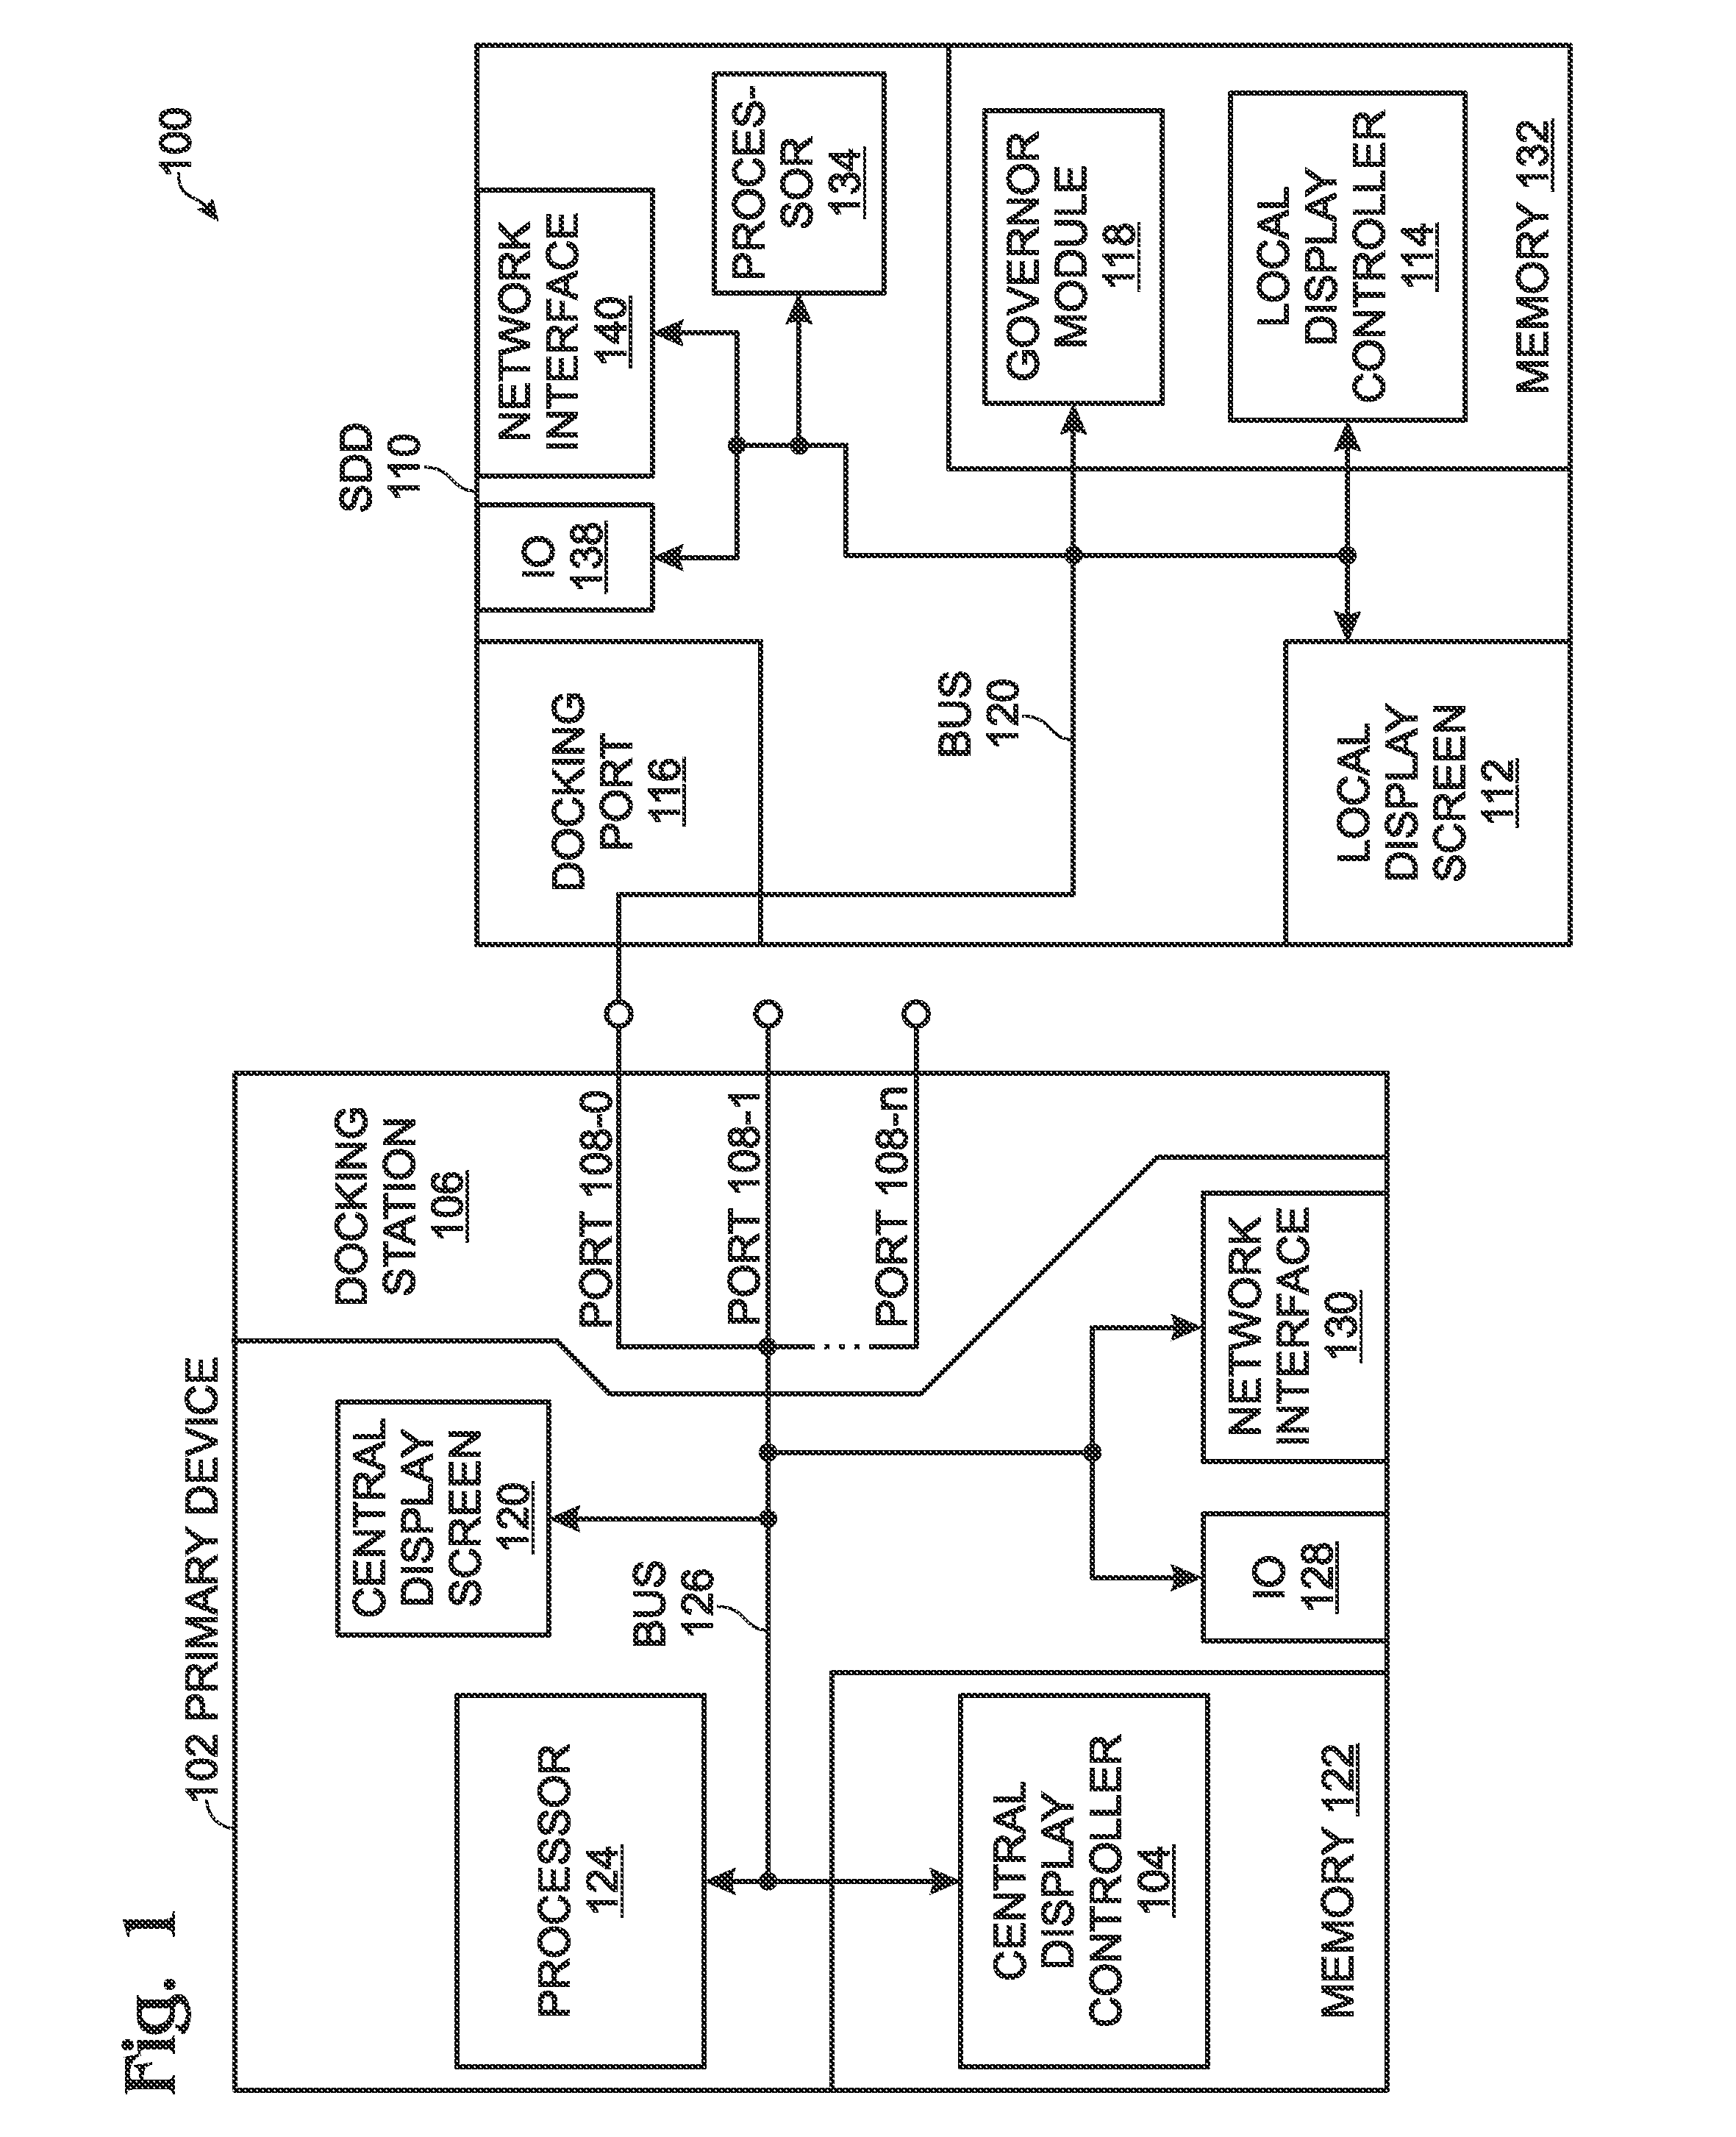 Multi-Function Display with Selectively Autonomous Secondary Modules